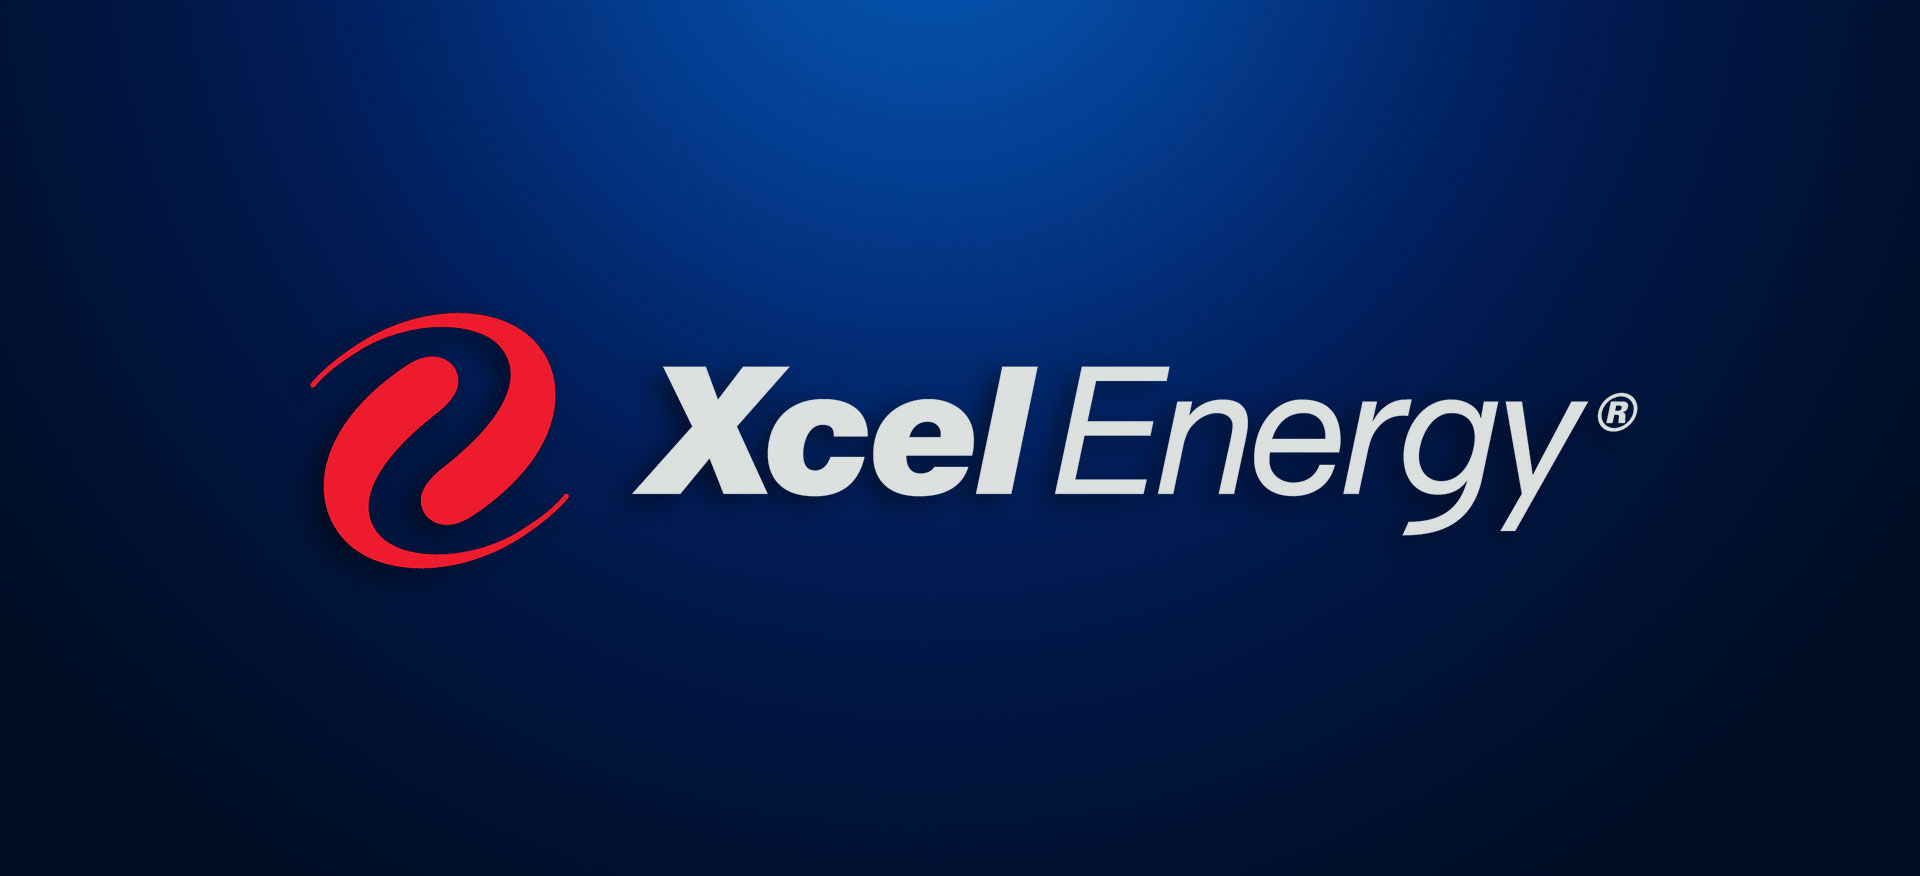 xcel energy - DriverLayer Search Engine